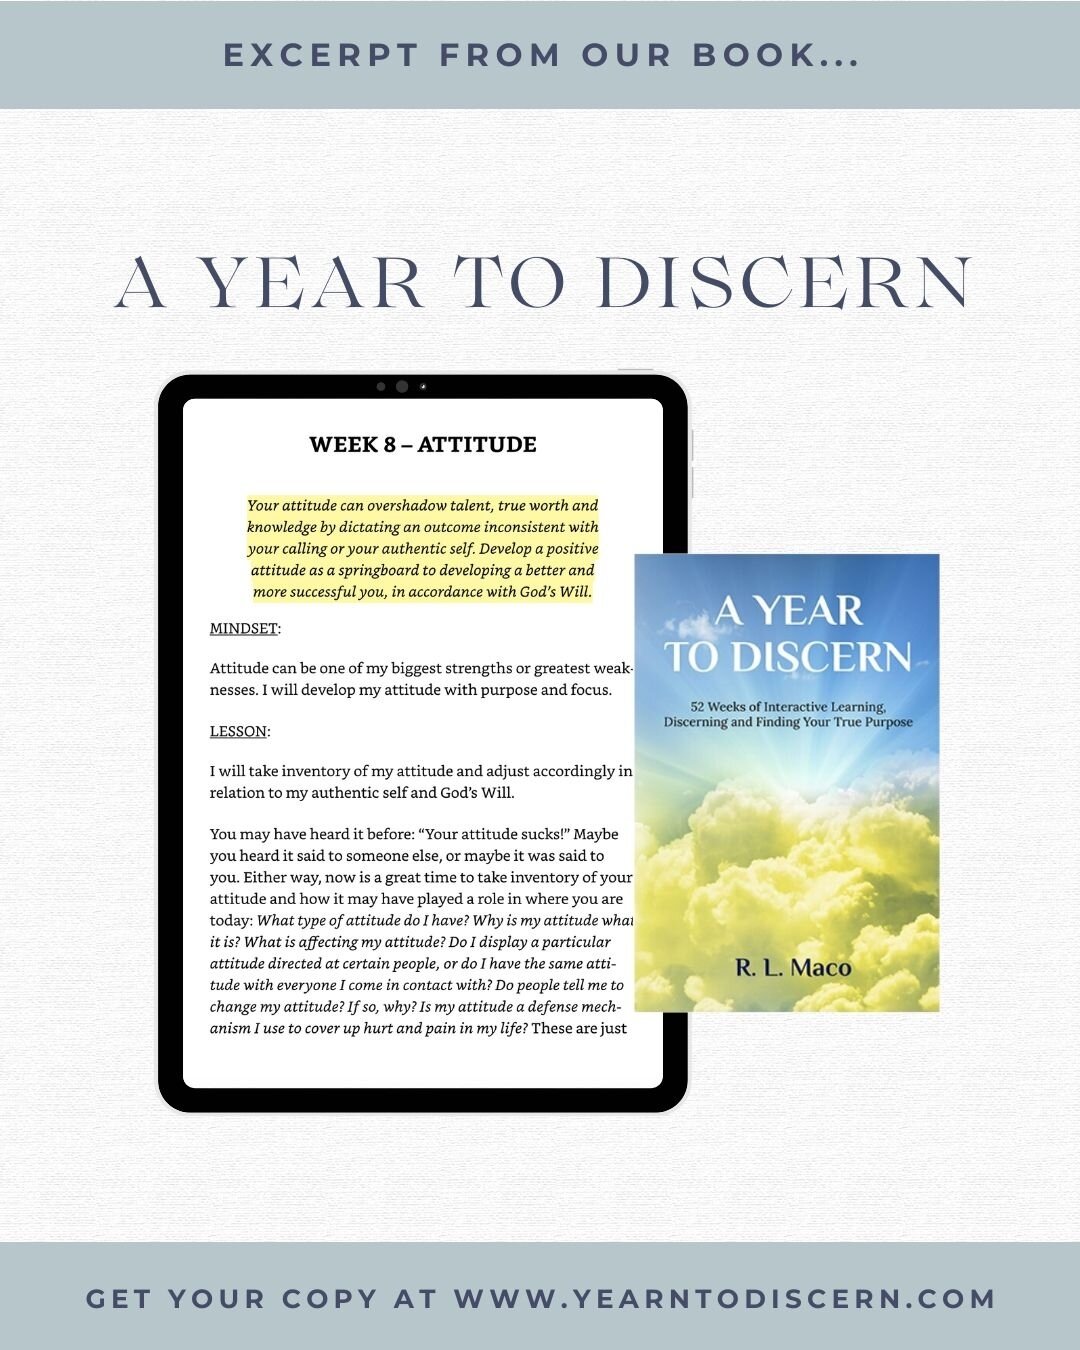 An excerpt from our book A Year To Discern.⁠
⁠
Happy Monday Everyone!!!! We&rsquo;re into Week 8 of the book &lsquo;A Year to Discern&rsquo;⁠
⁠
As you know, the first quarter is about #SelfAnalysis and reprogramming your mind. Week 8 is about Attitud